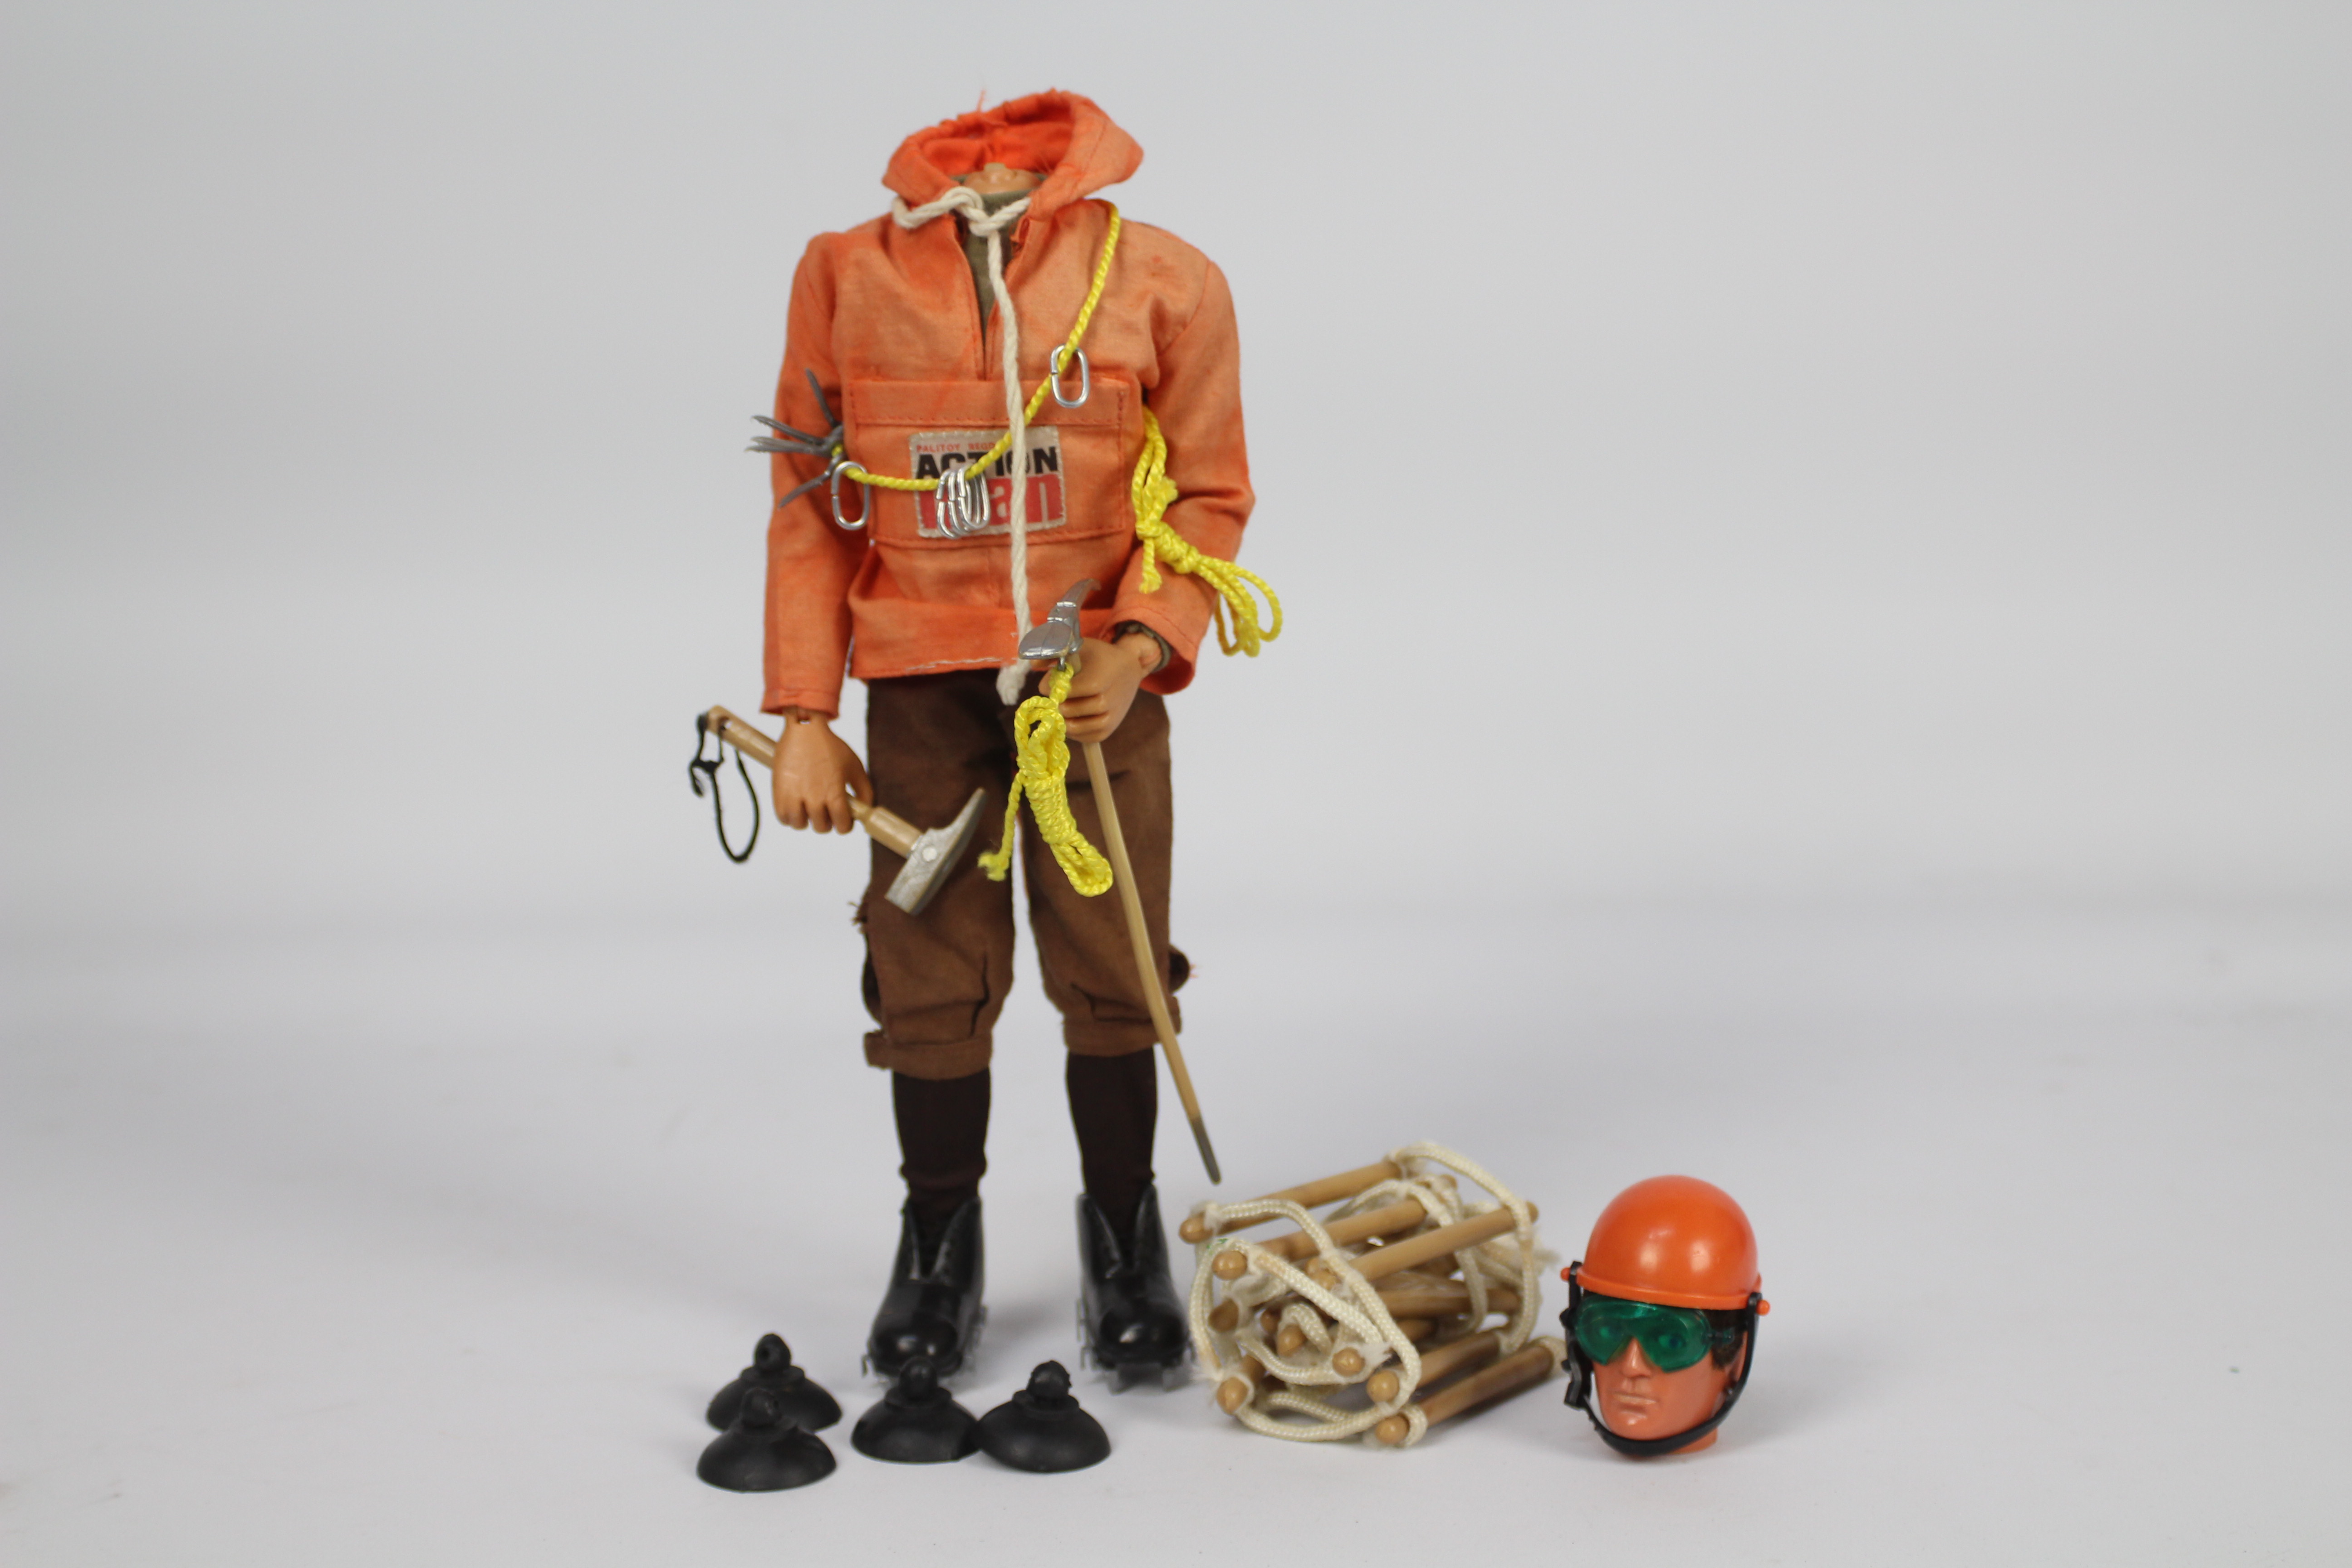 Palitoy, Action Man - A Palitoy Action Man figure in Mountaineer outfit. - Image 4 of 10